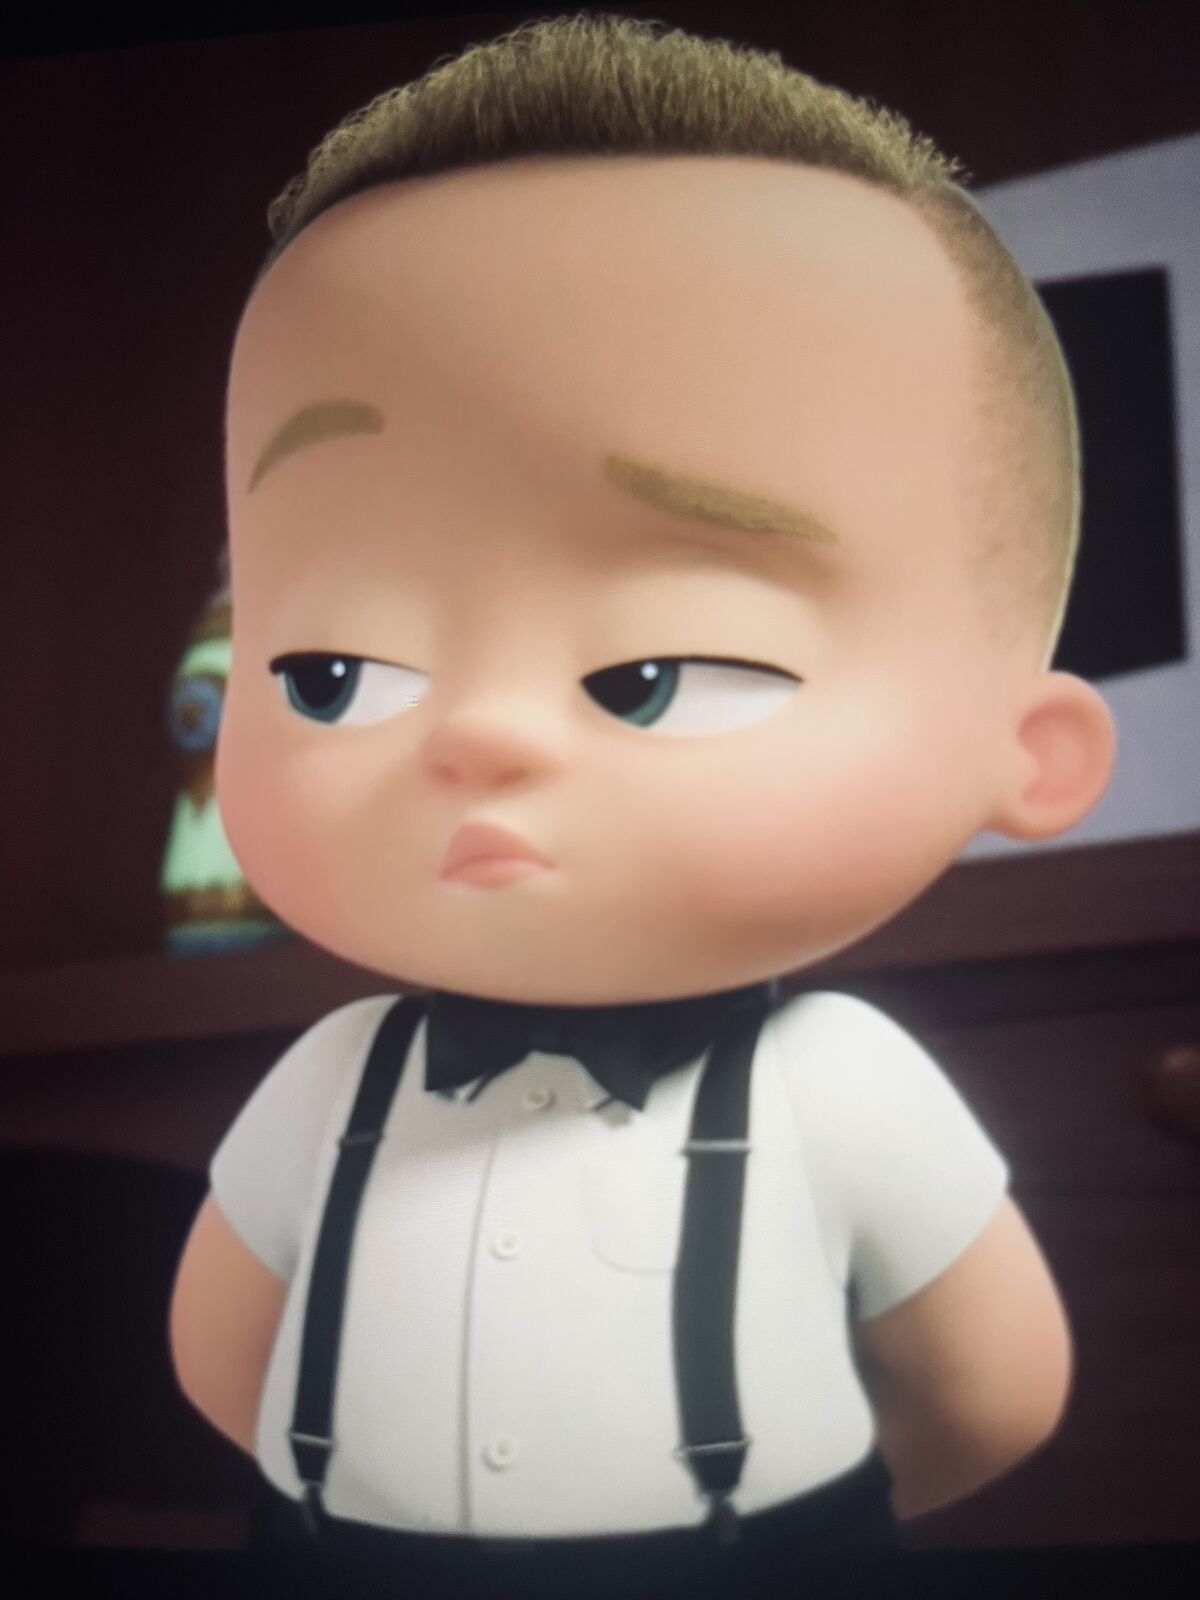 Wallpaper ID 437165  Movie The Boss Baby Phone Wallpaper  750x1334 free  download